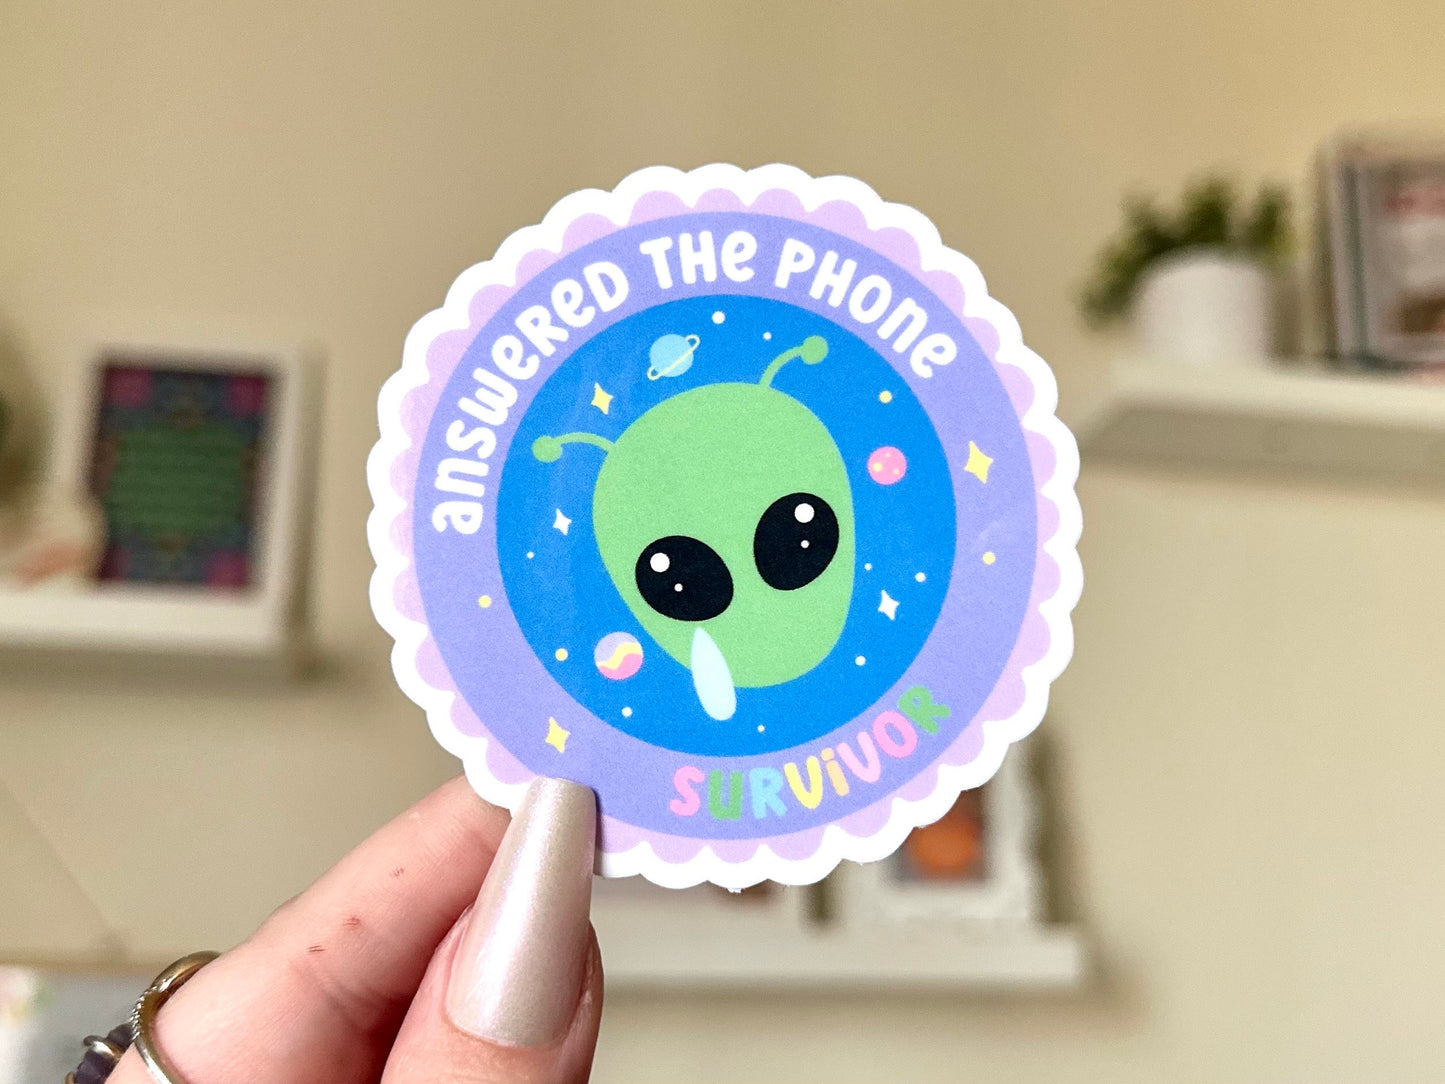 Answered The Phone Survivor Waterproof Sticker, Intuition, Self Care, Self Love, Mental Health Gifts, Anxious, Cute Mental Health